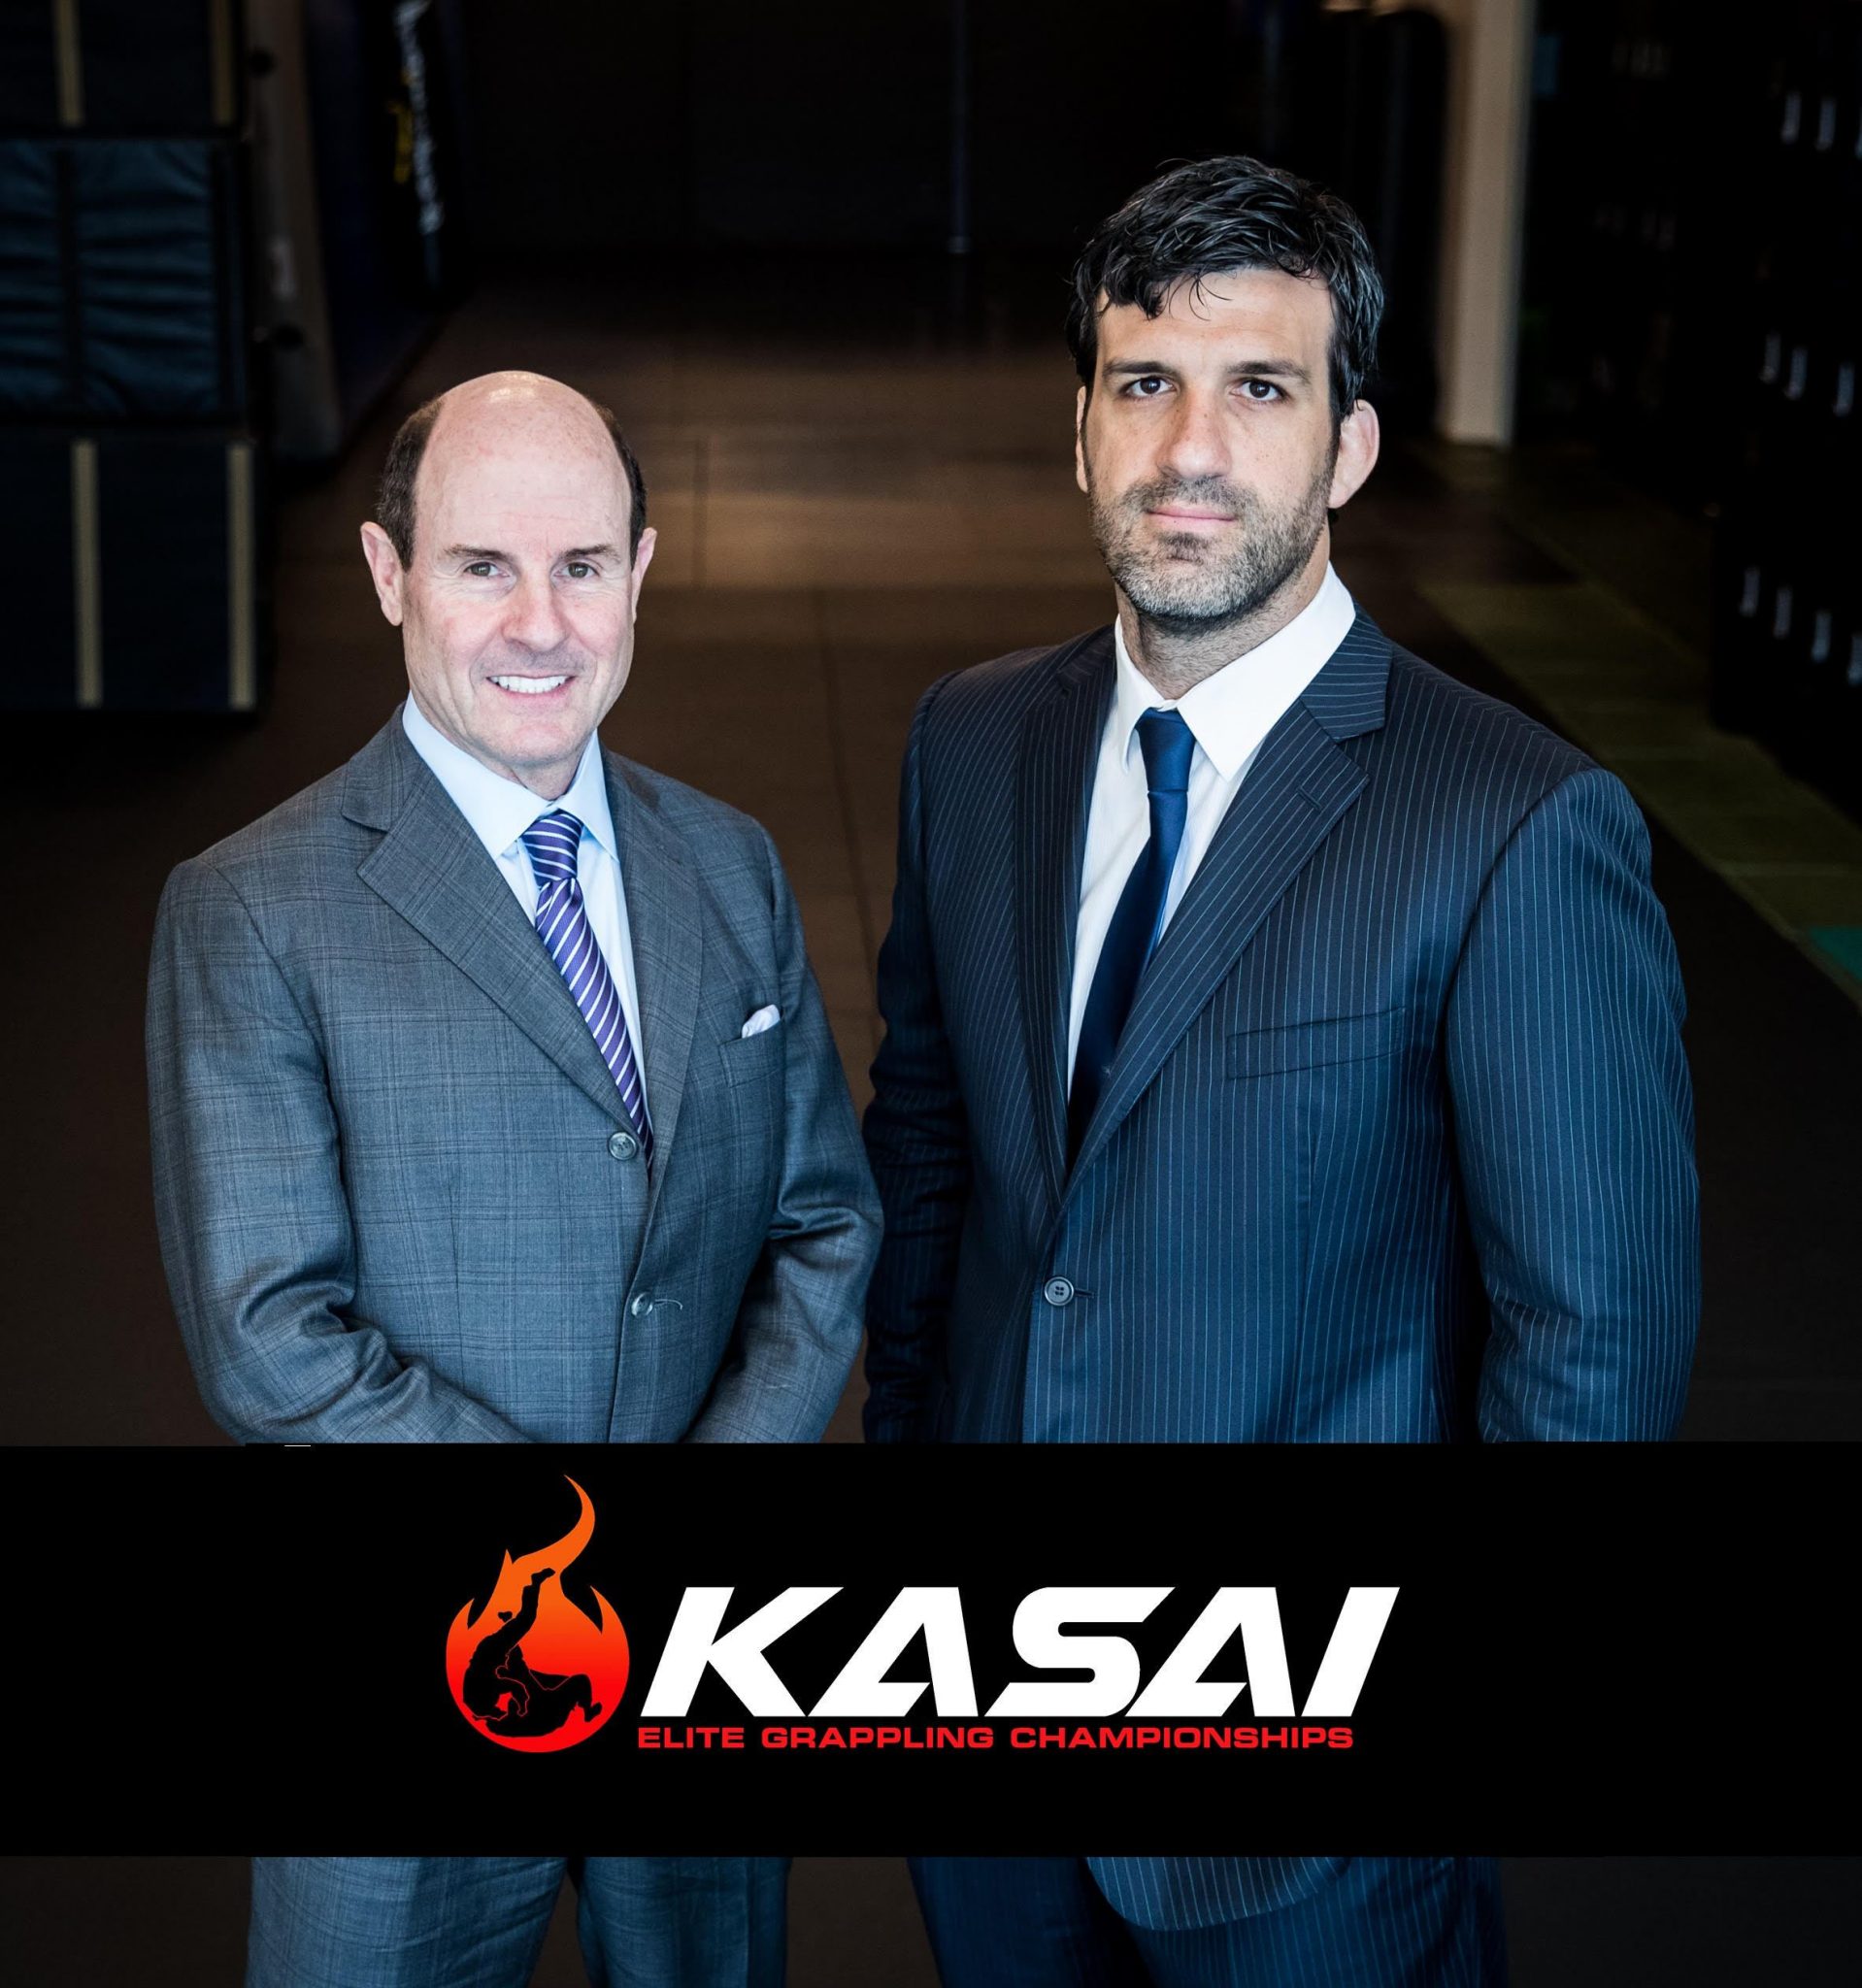 KASAI CEO Rich Byrne and President Rolles Gracie